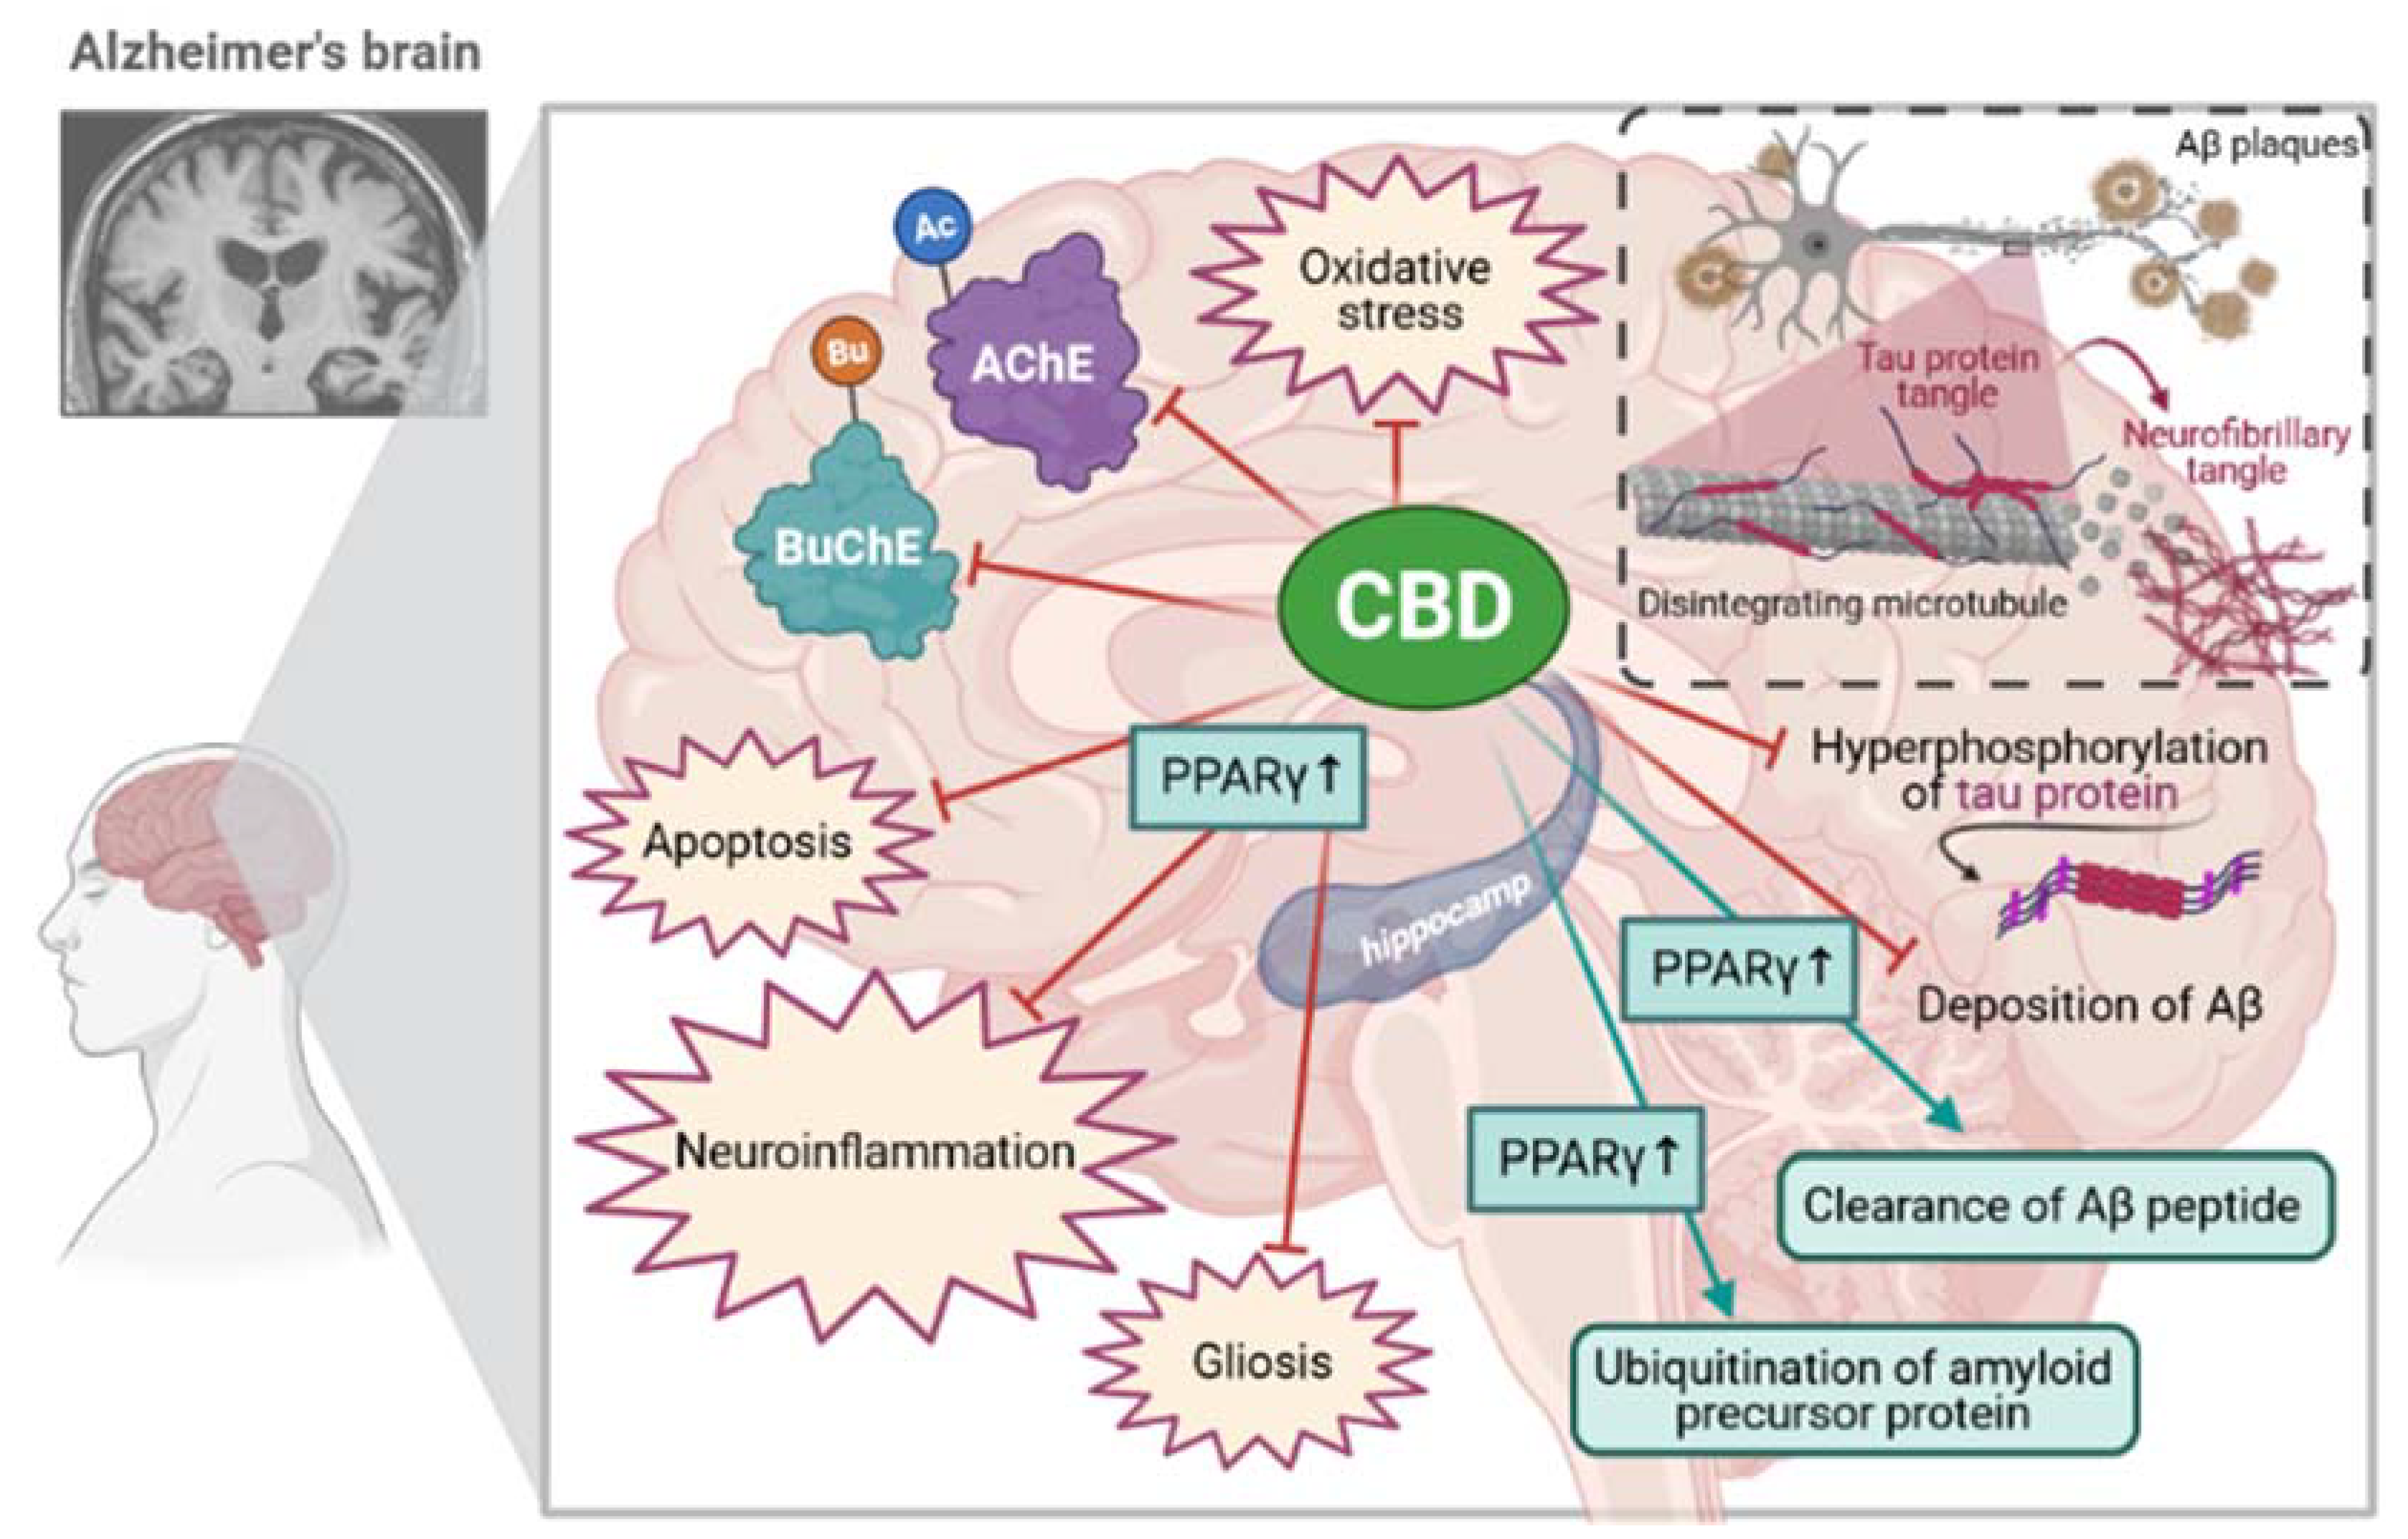 IV. The Mechanism of Action of Cannabidiol in Treating Neurodegenerative Diseases